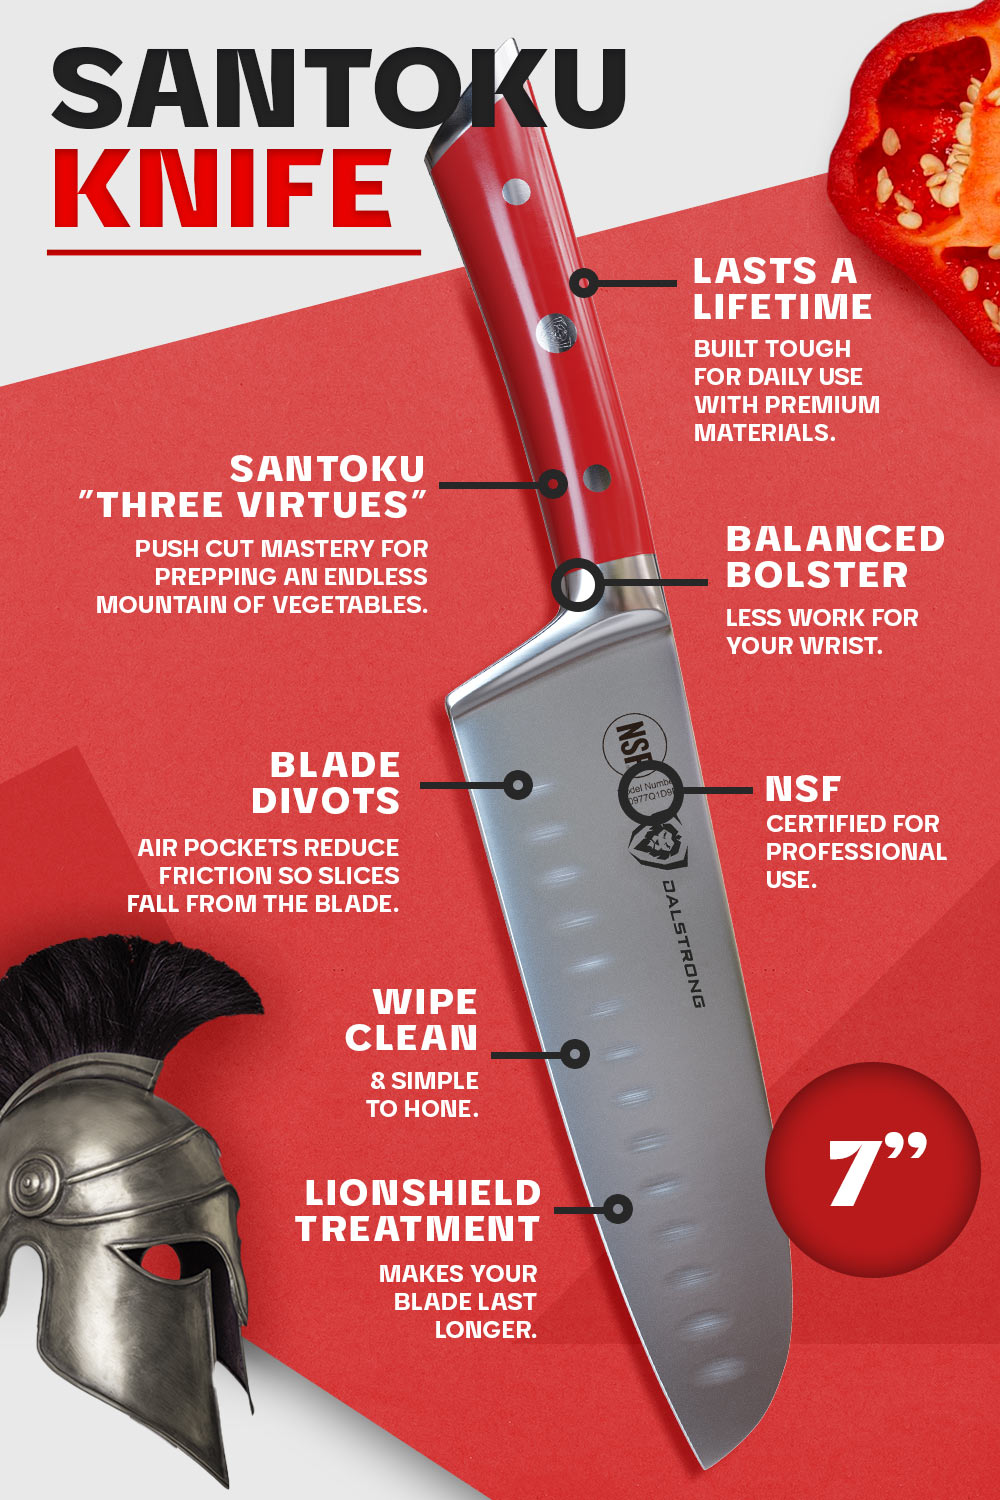 Dalstrong gladiator series 7 inch santoku knife with red handle specification.